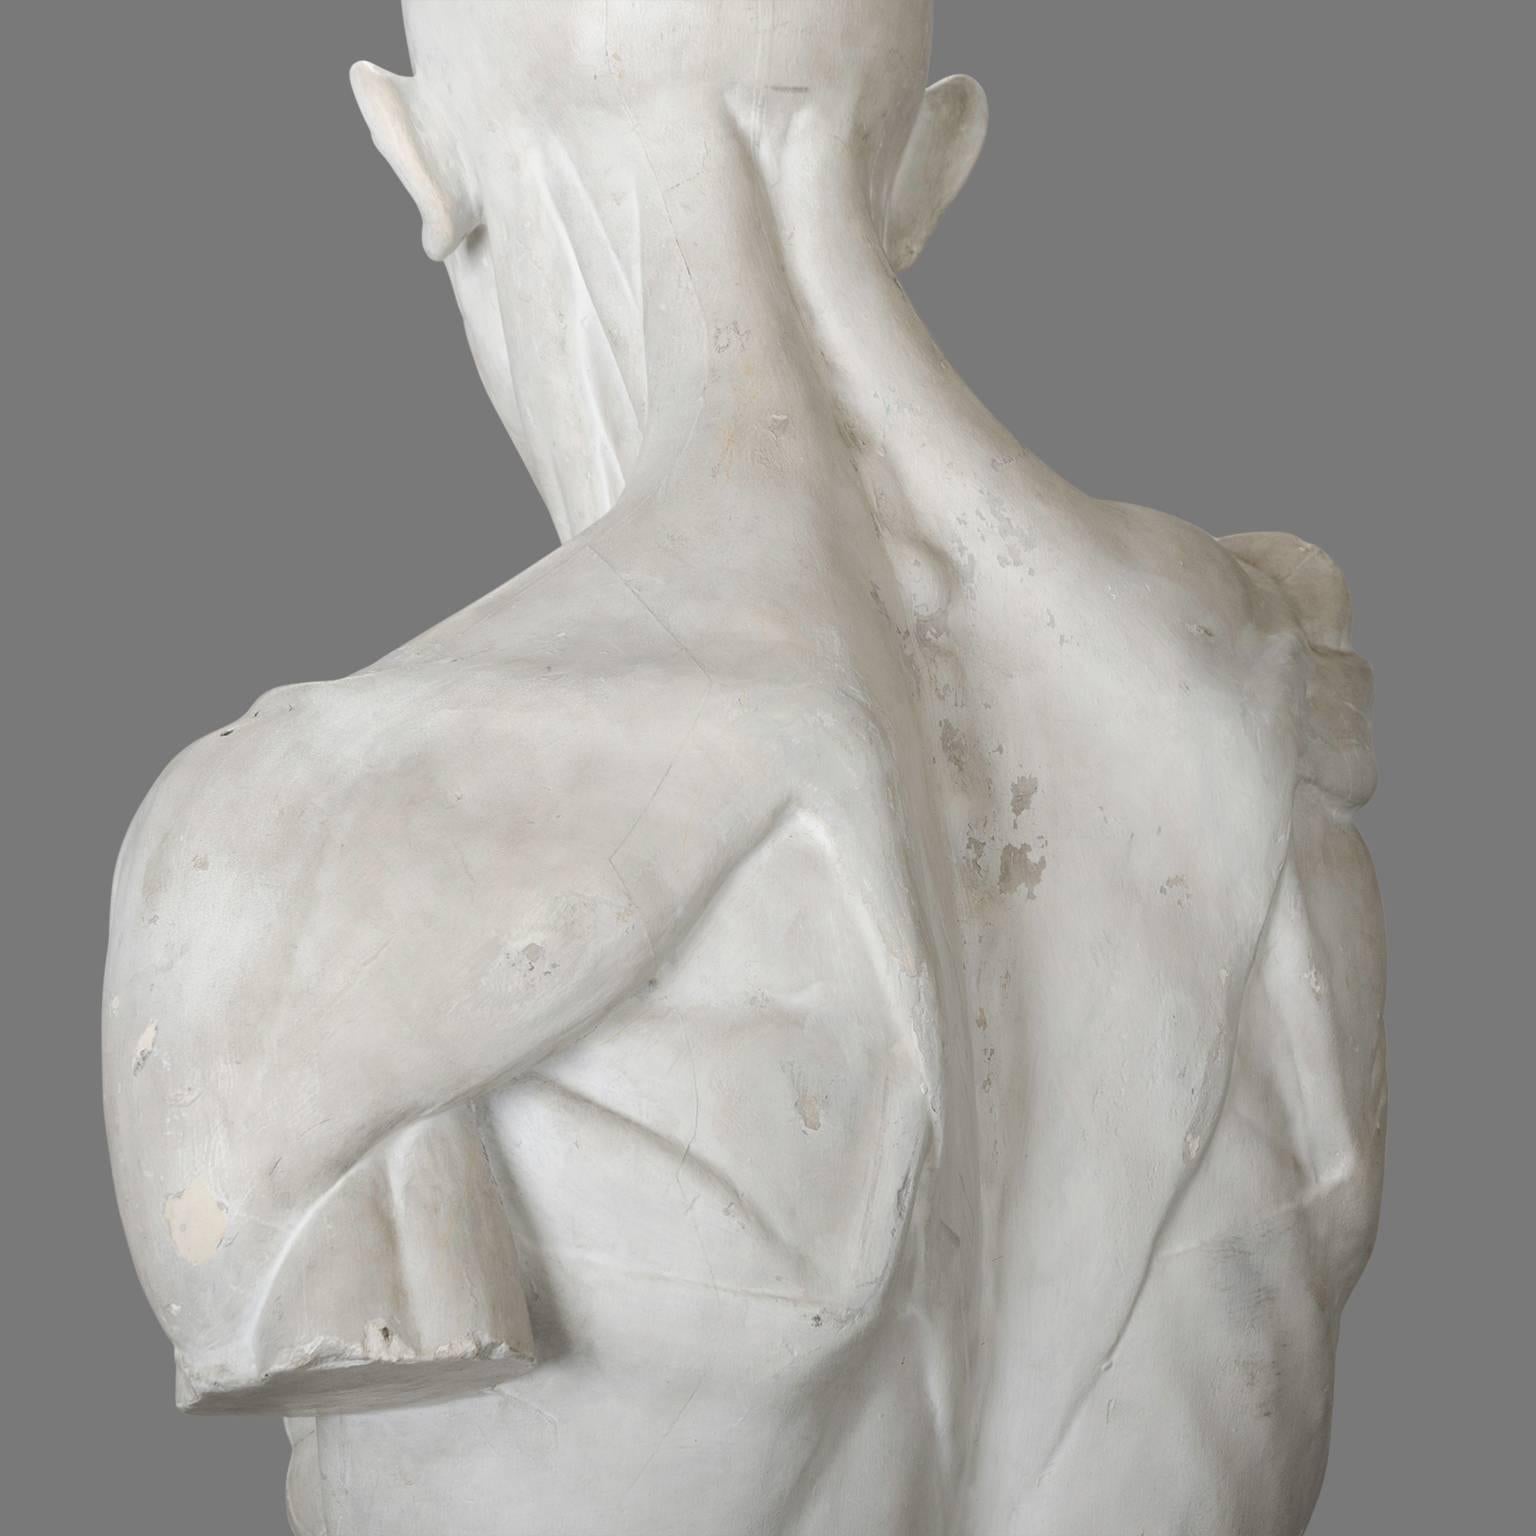 Early 20th Century Two Skinned Anatomic Plaster Models after Houdon